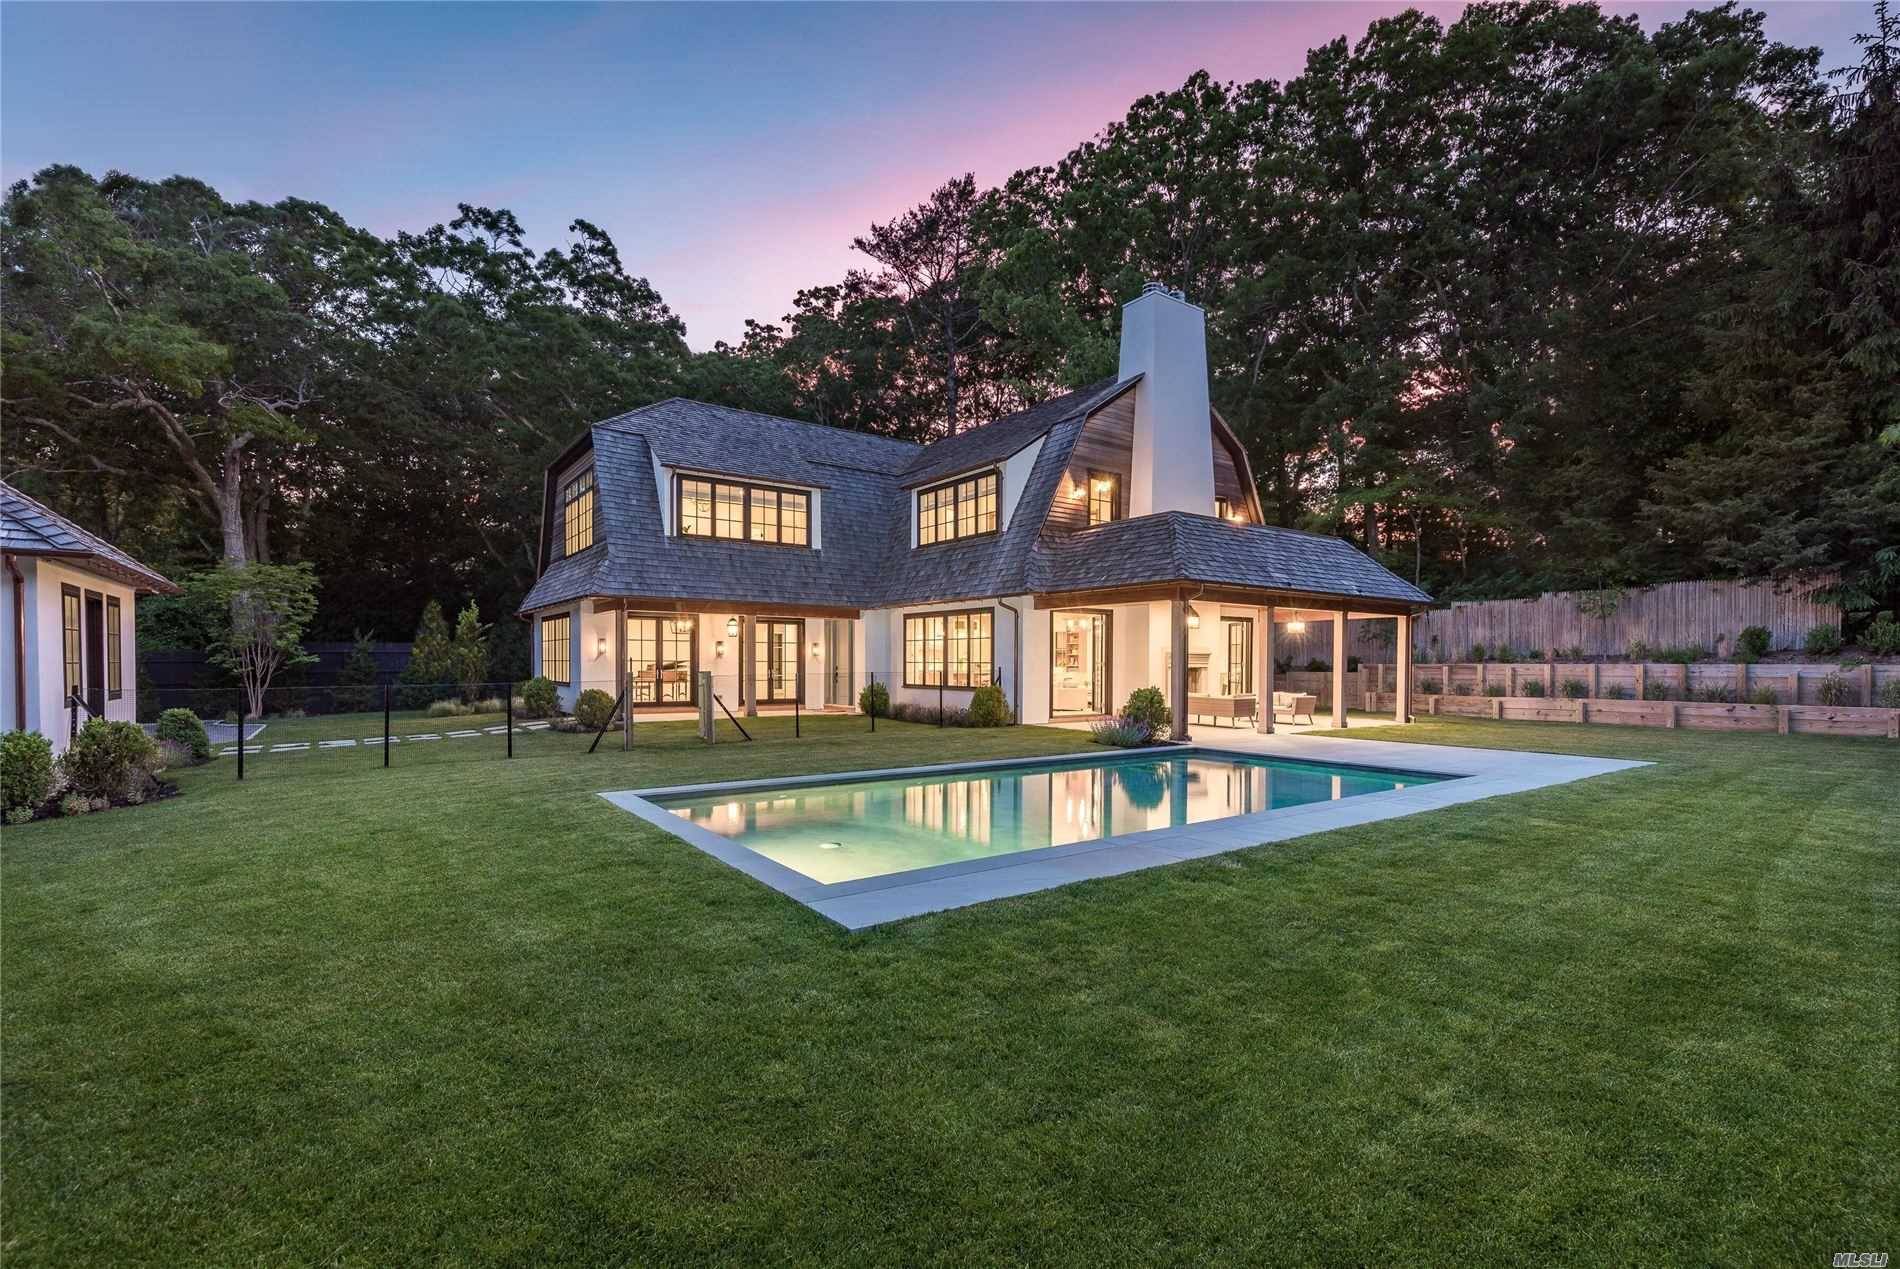 Exceptional Design, unrivaled architectural details, and the finest craftsmanship are the true hallmarks of this custom built one of a kind French Country Style Hamptons Masterpiece !